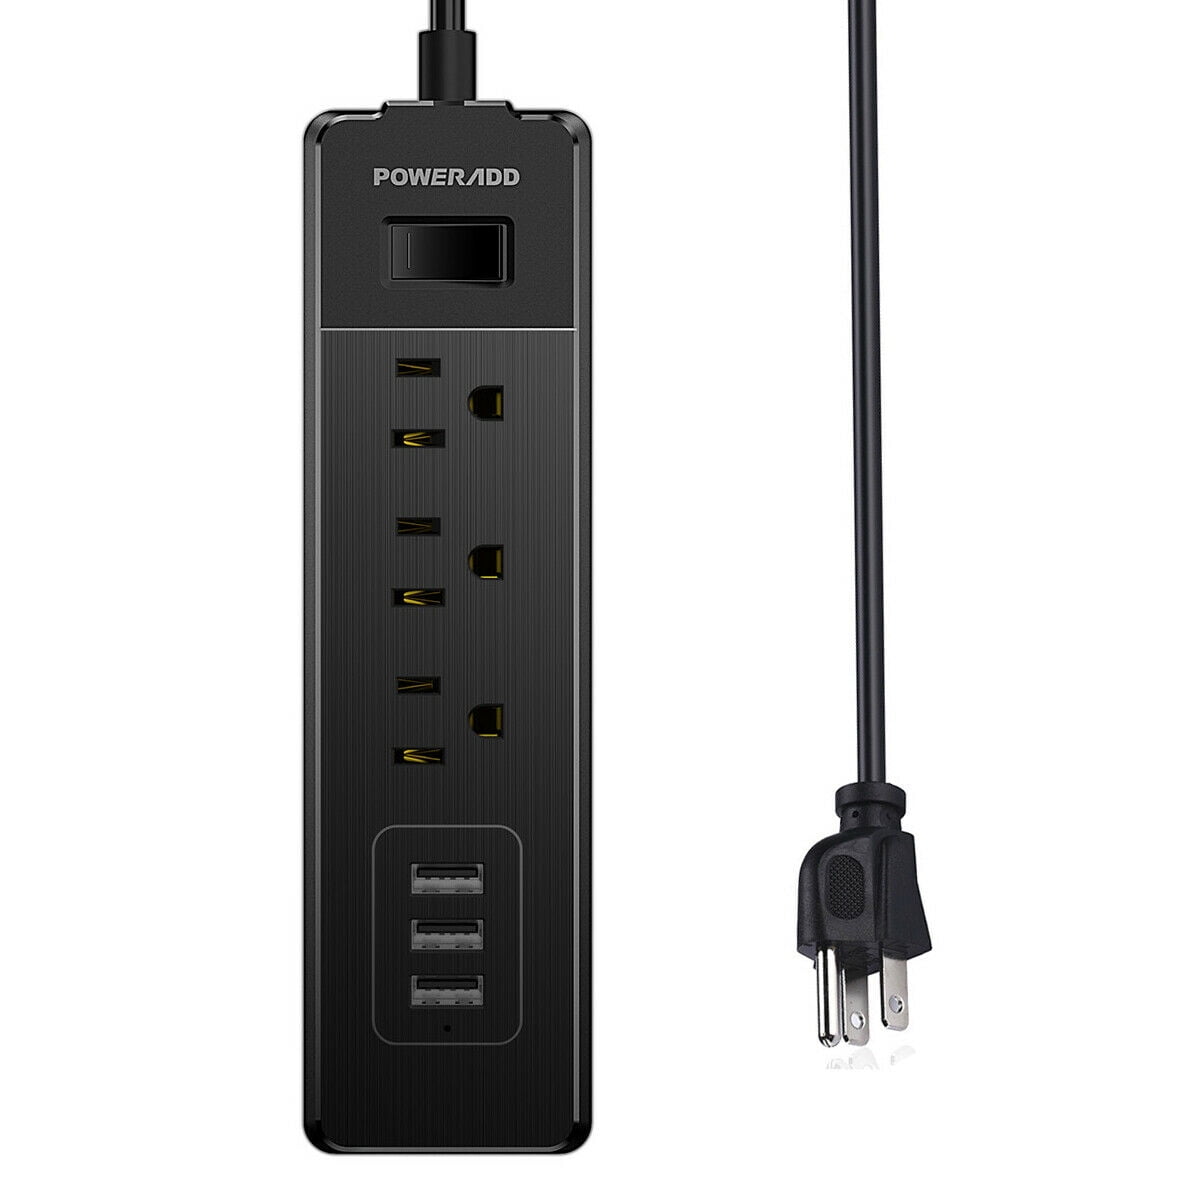 Poweradd 3 Outlet Power Strip Surge Protector Lightningproof with 3 USB Port 5ft 